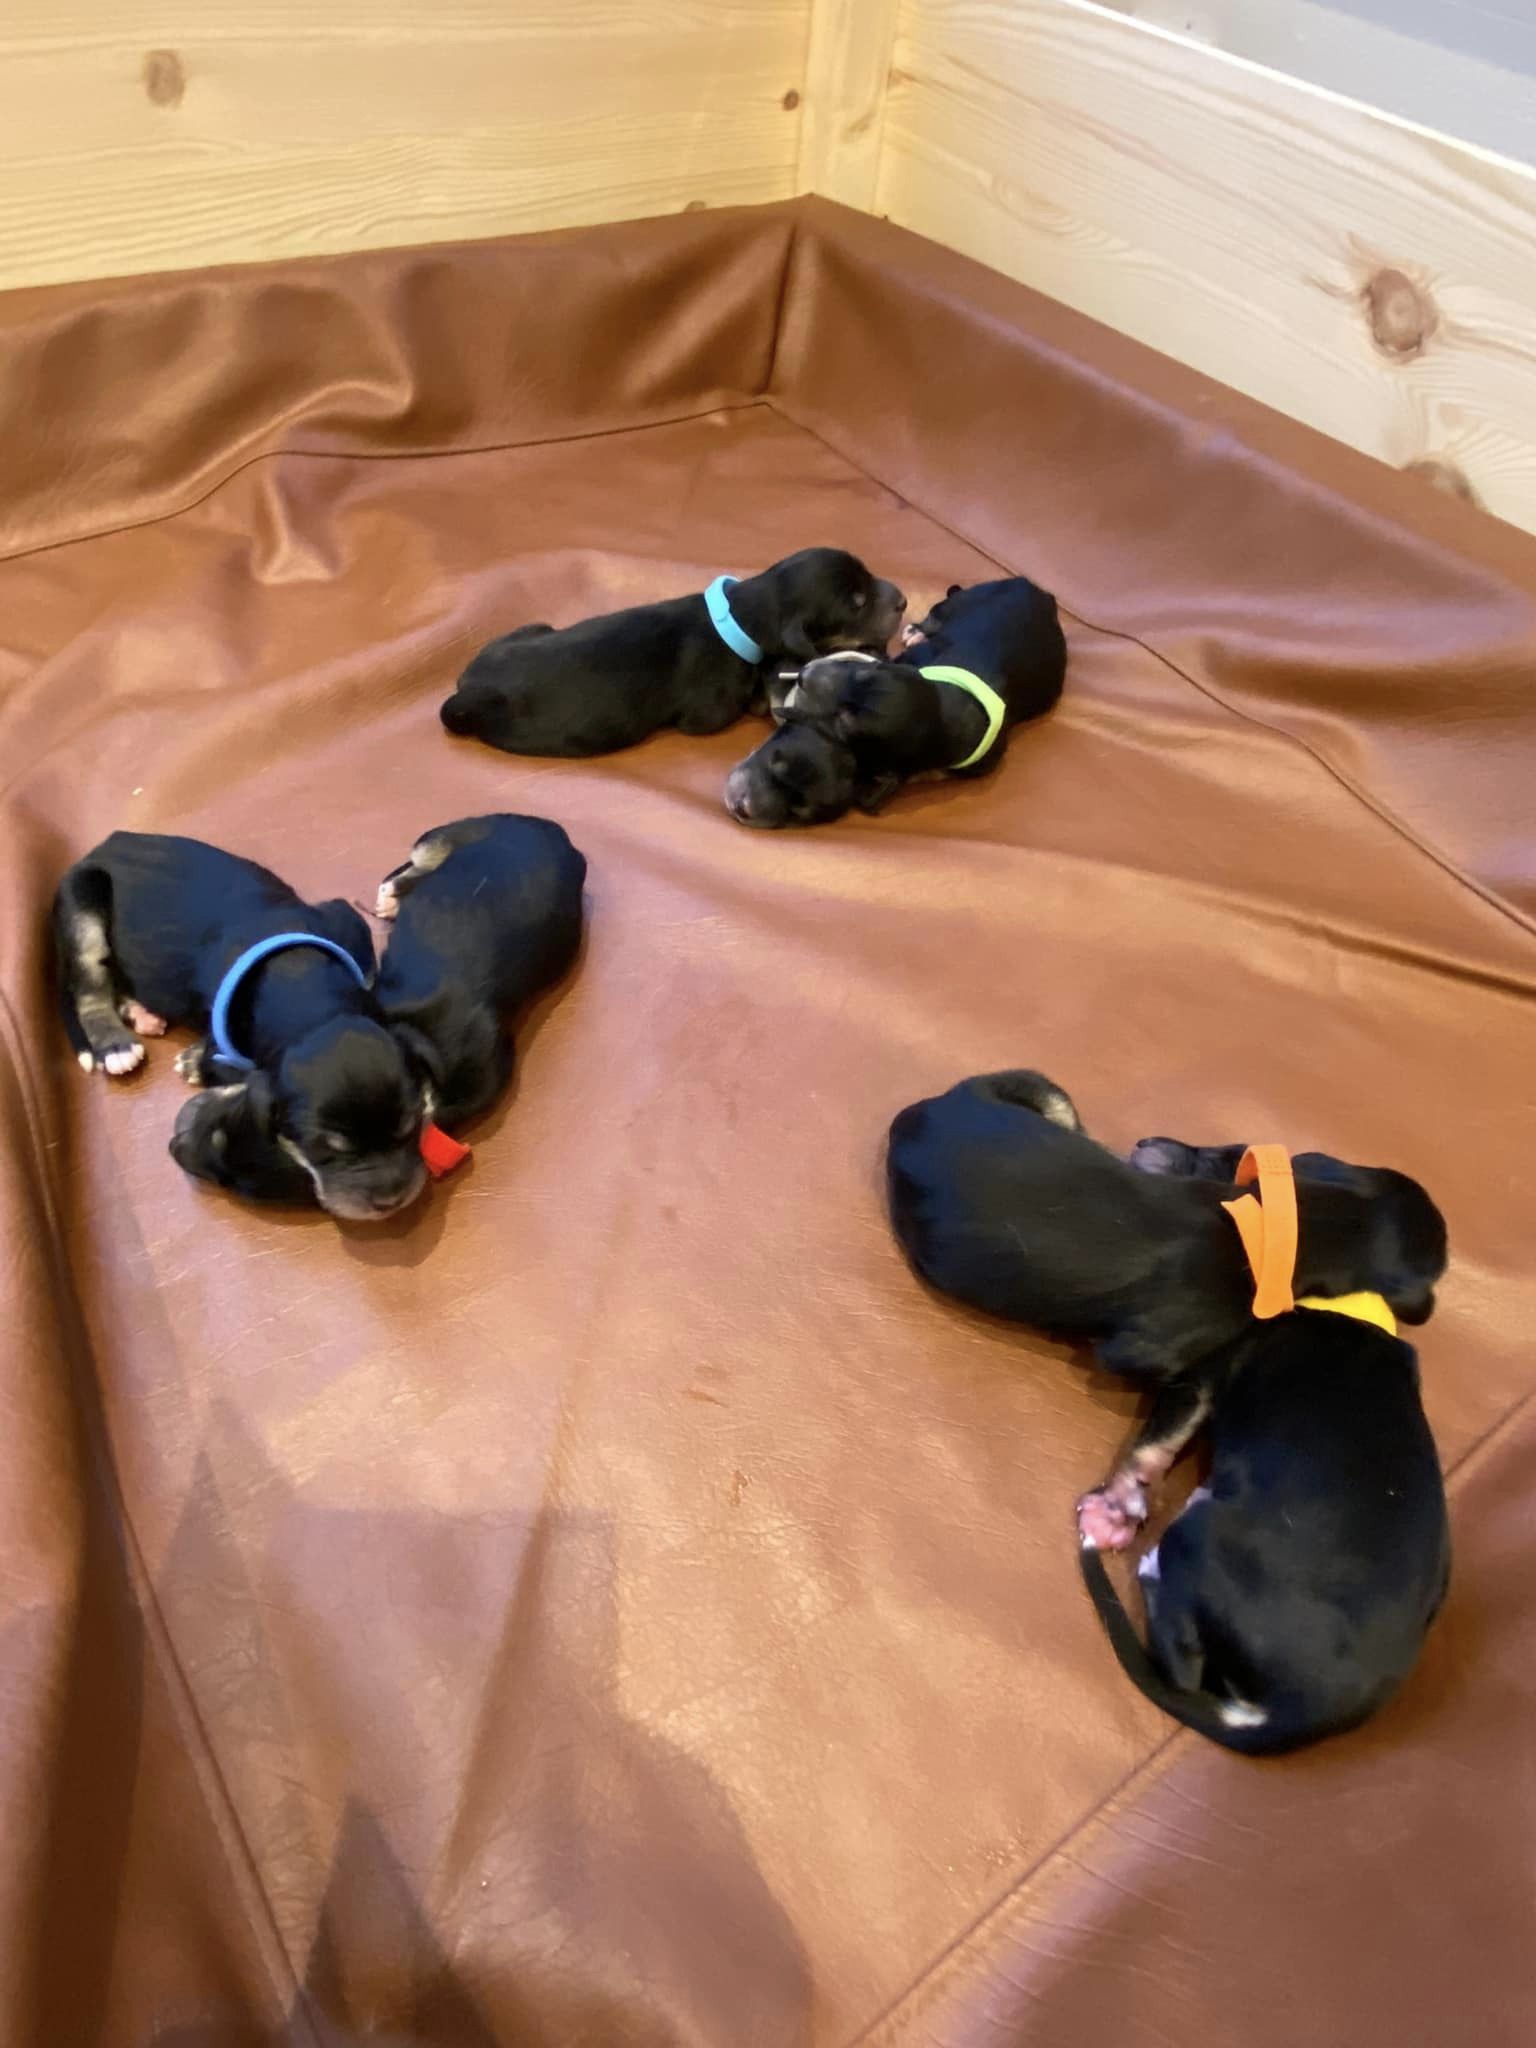 All 7 pups